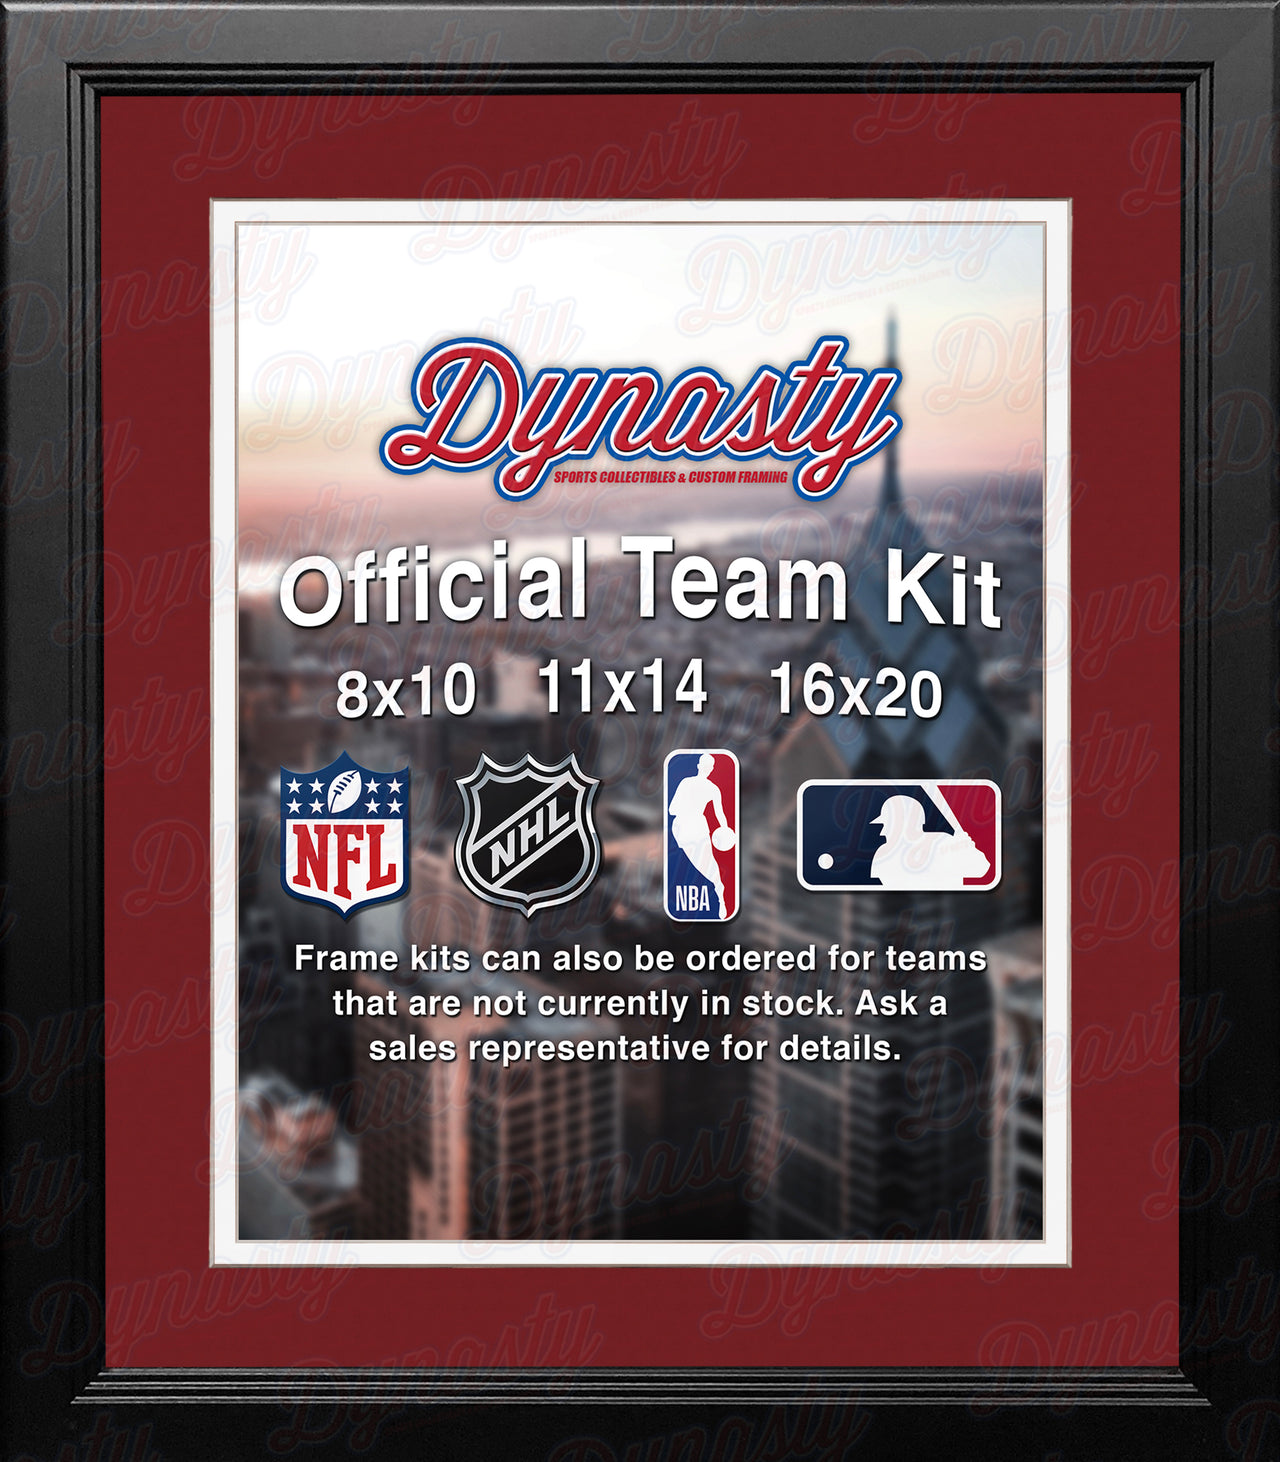 NBA Basketball Photo Picture Frame Kit - Los Angeles Clippers (Red Matting, White Trim) - Dynasty Sports & Framing 